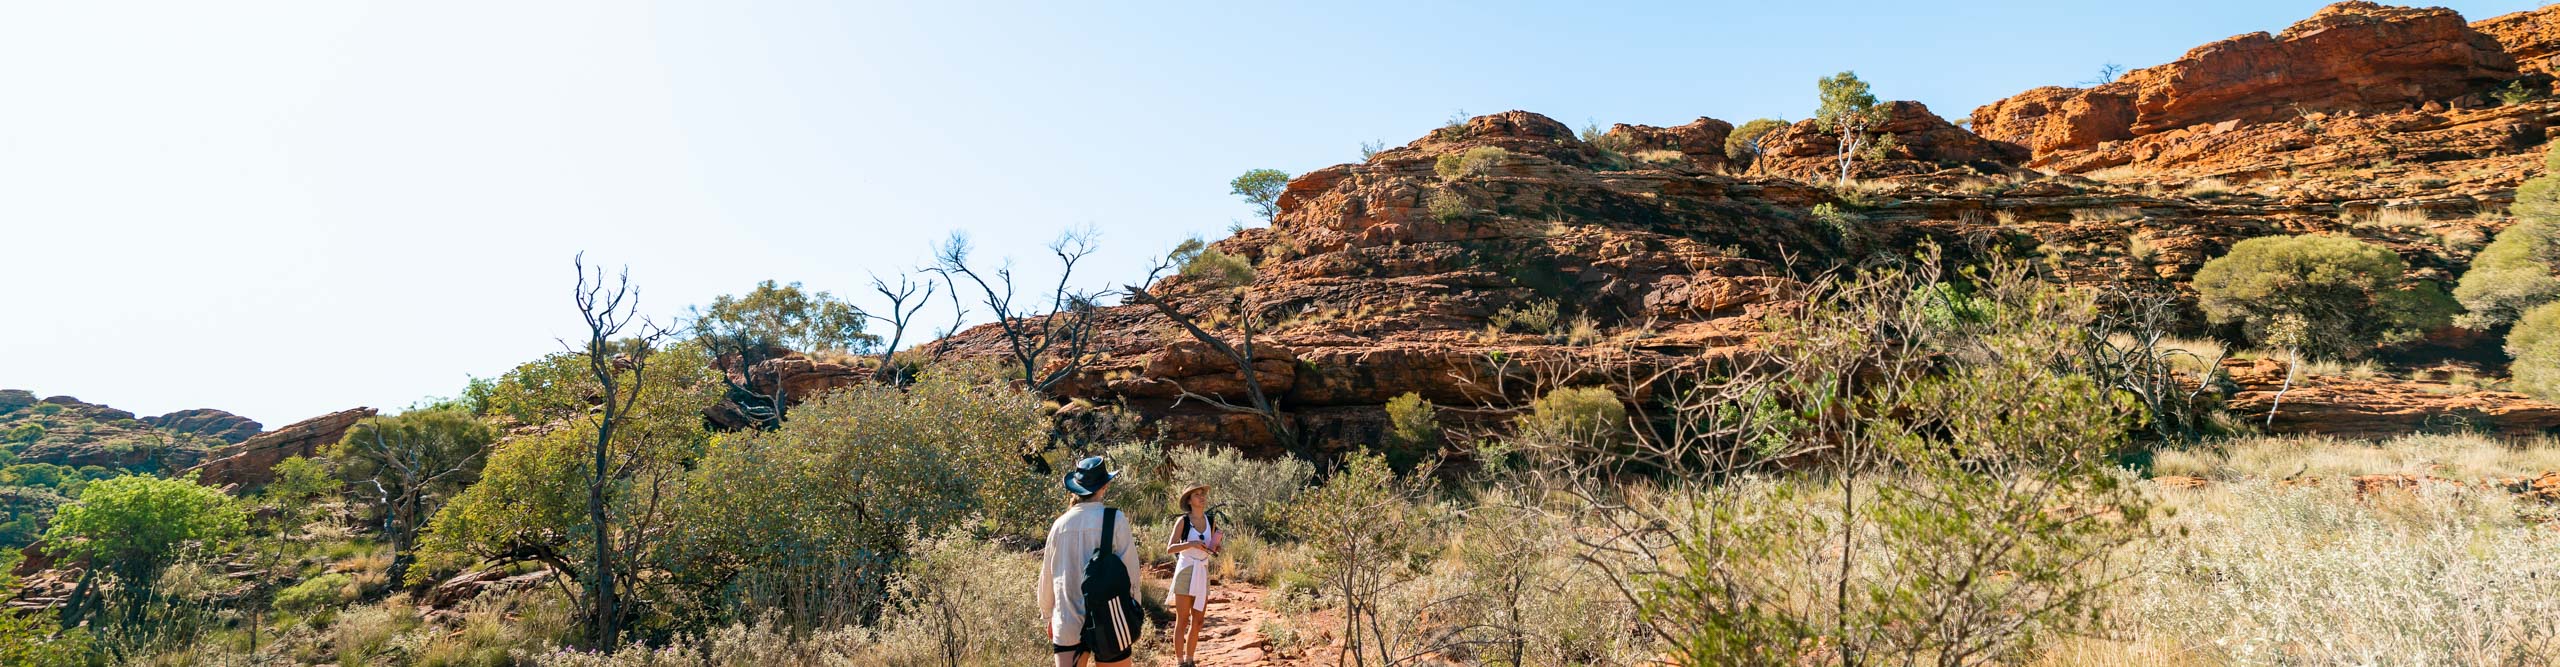 Travellers walking amongst the cliffs on Kings Canyon, Northern Territory, Australia 